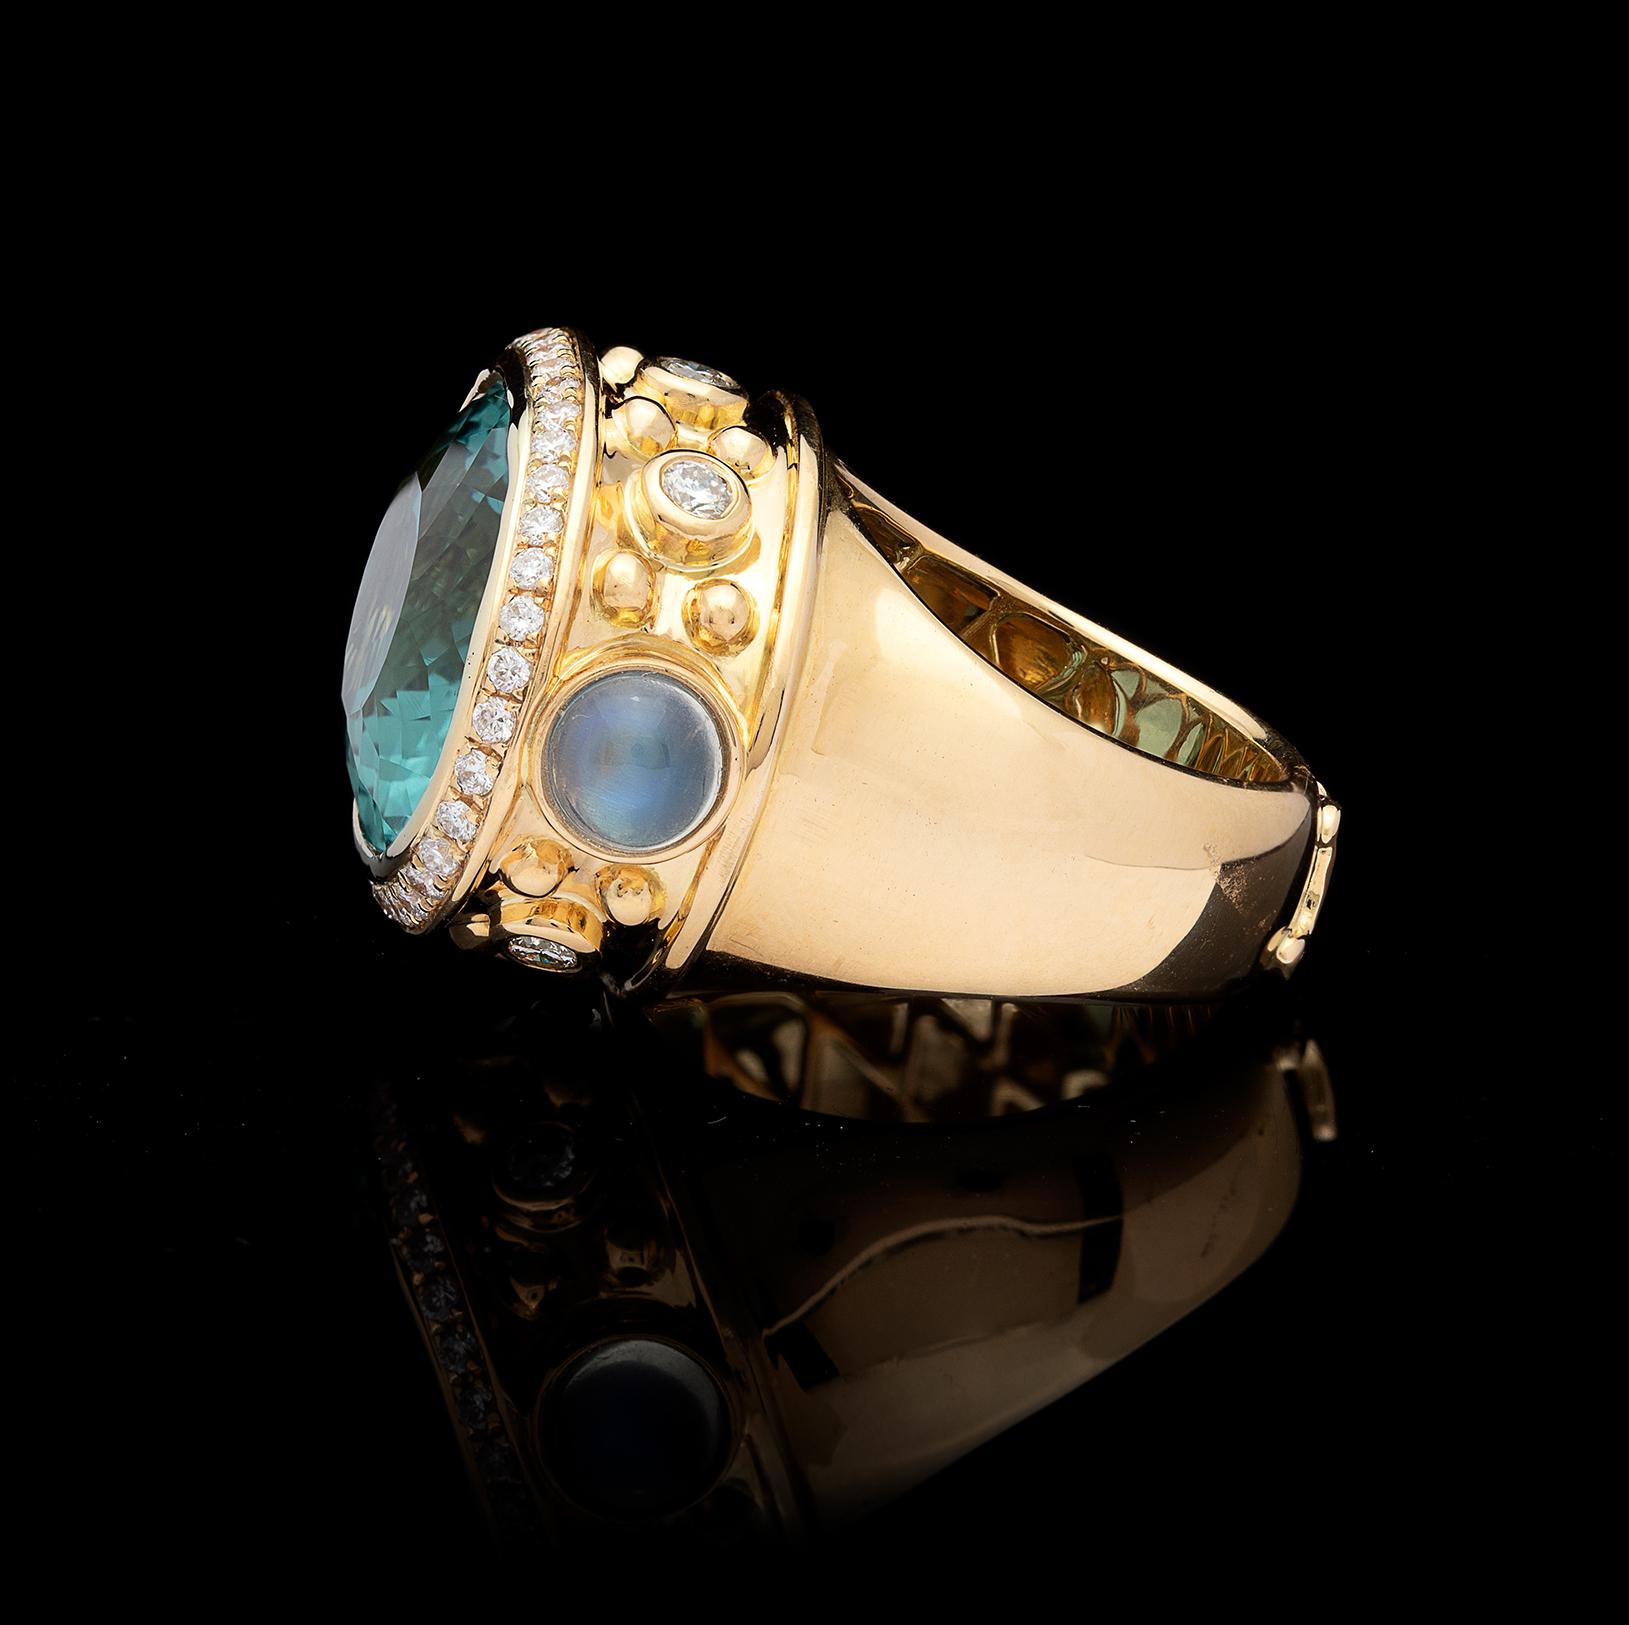 Boldly contemporary, this 18k yellow gold custom handmade ring is designed with a 17-ct. horizontally bezel-set teal blue topaz, with the surrounded frame accented by 2 cabochon moonstones and 42 round brilliant-cut diamonds. Total diamond weight